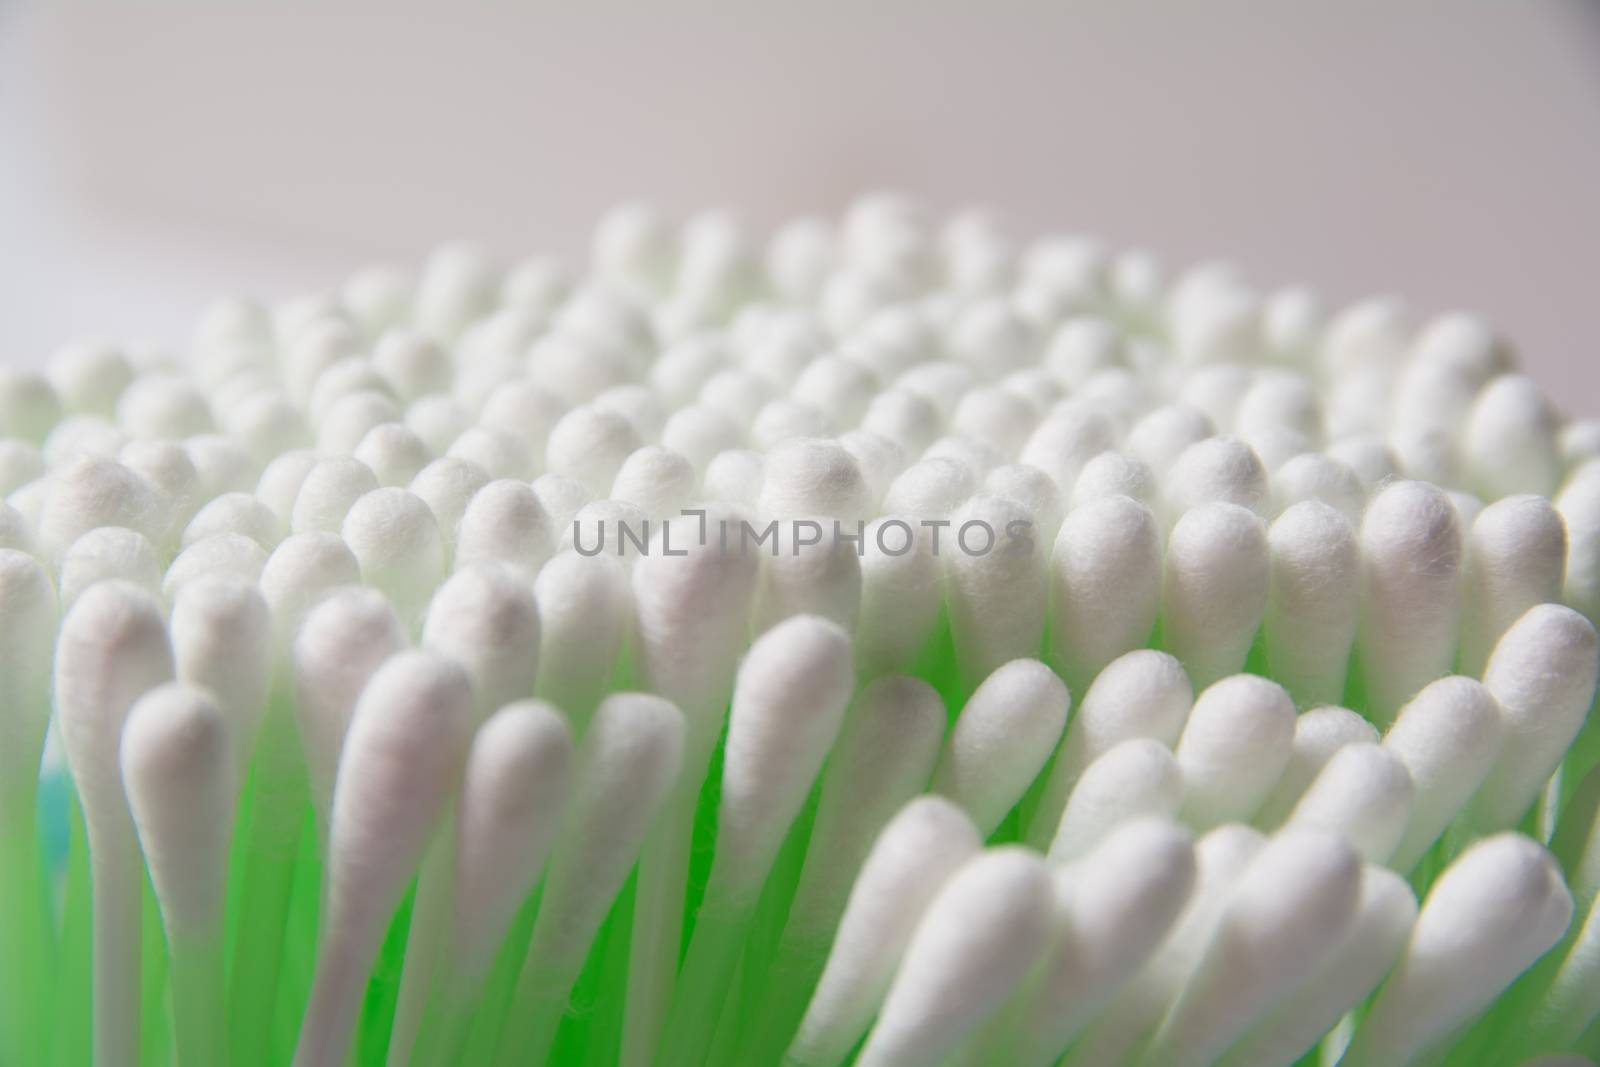 Green cotton swab bud over the grey background. Group of green plastic cotton swabs.